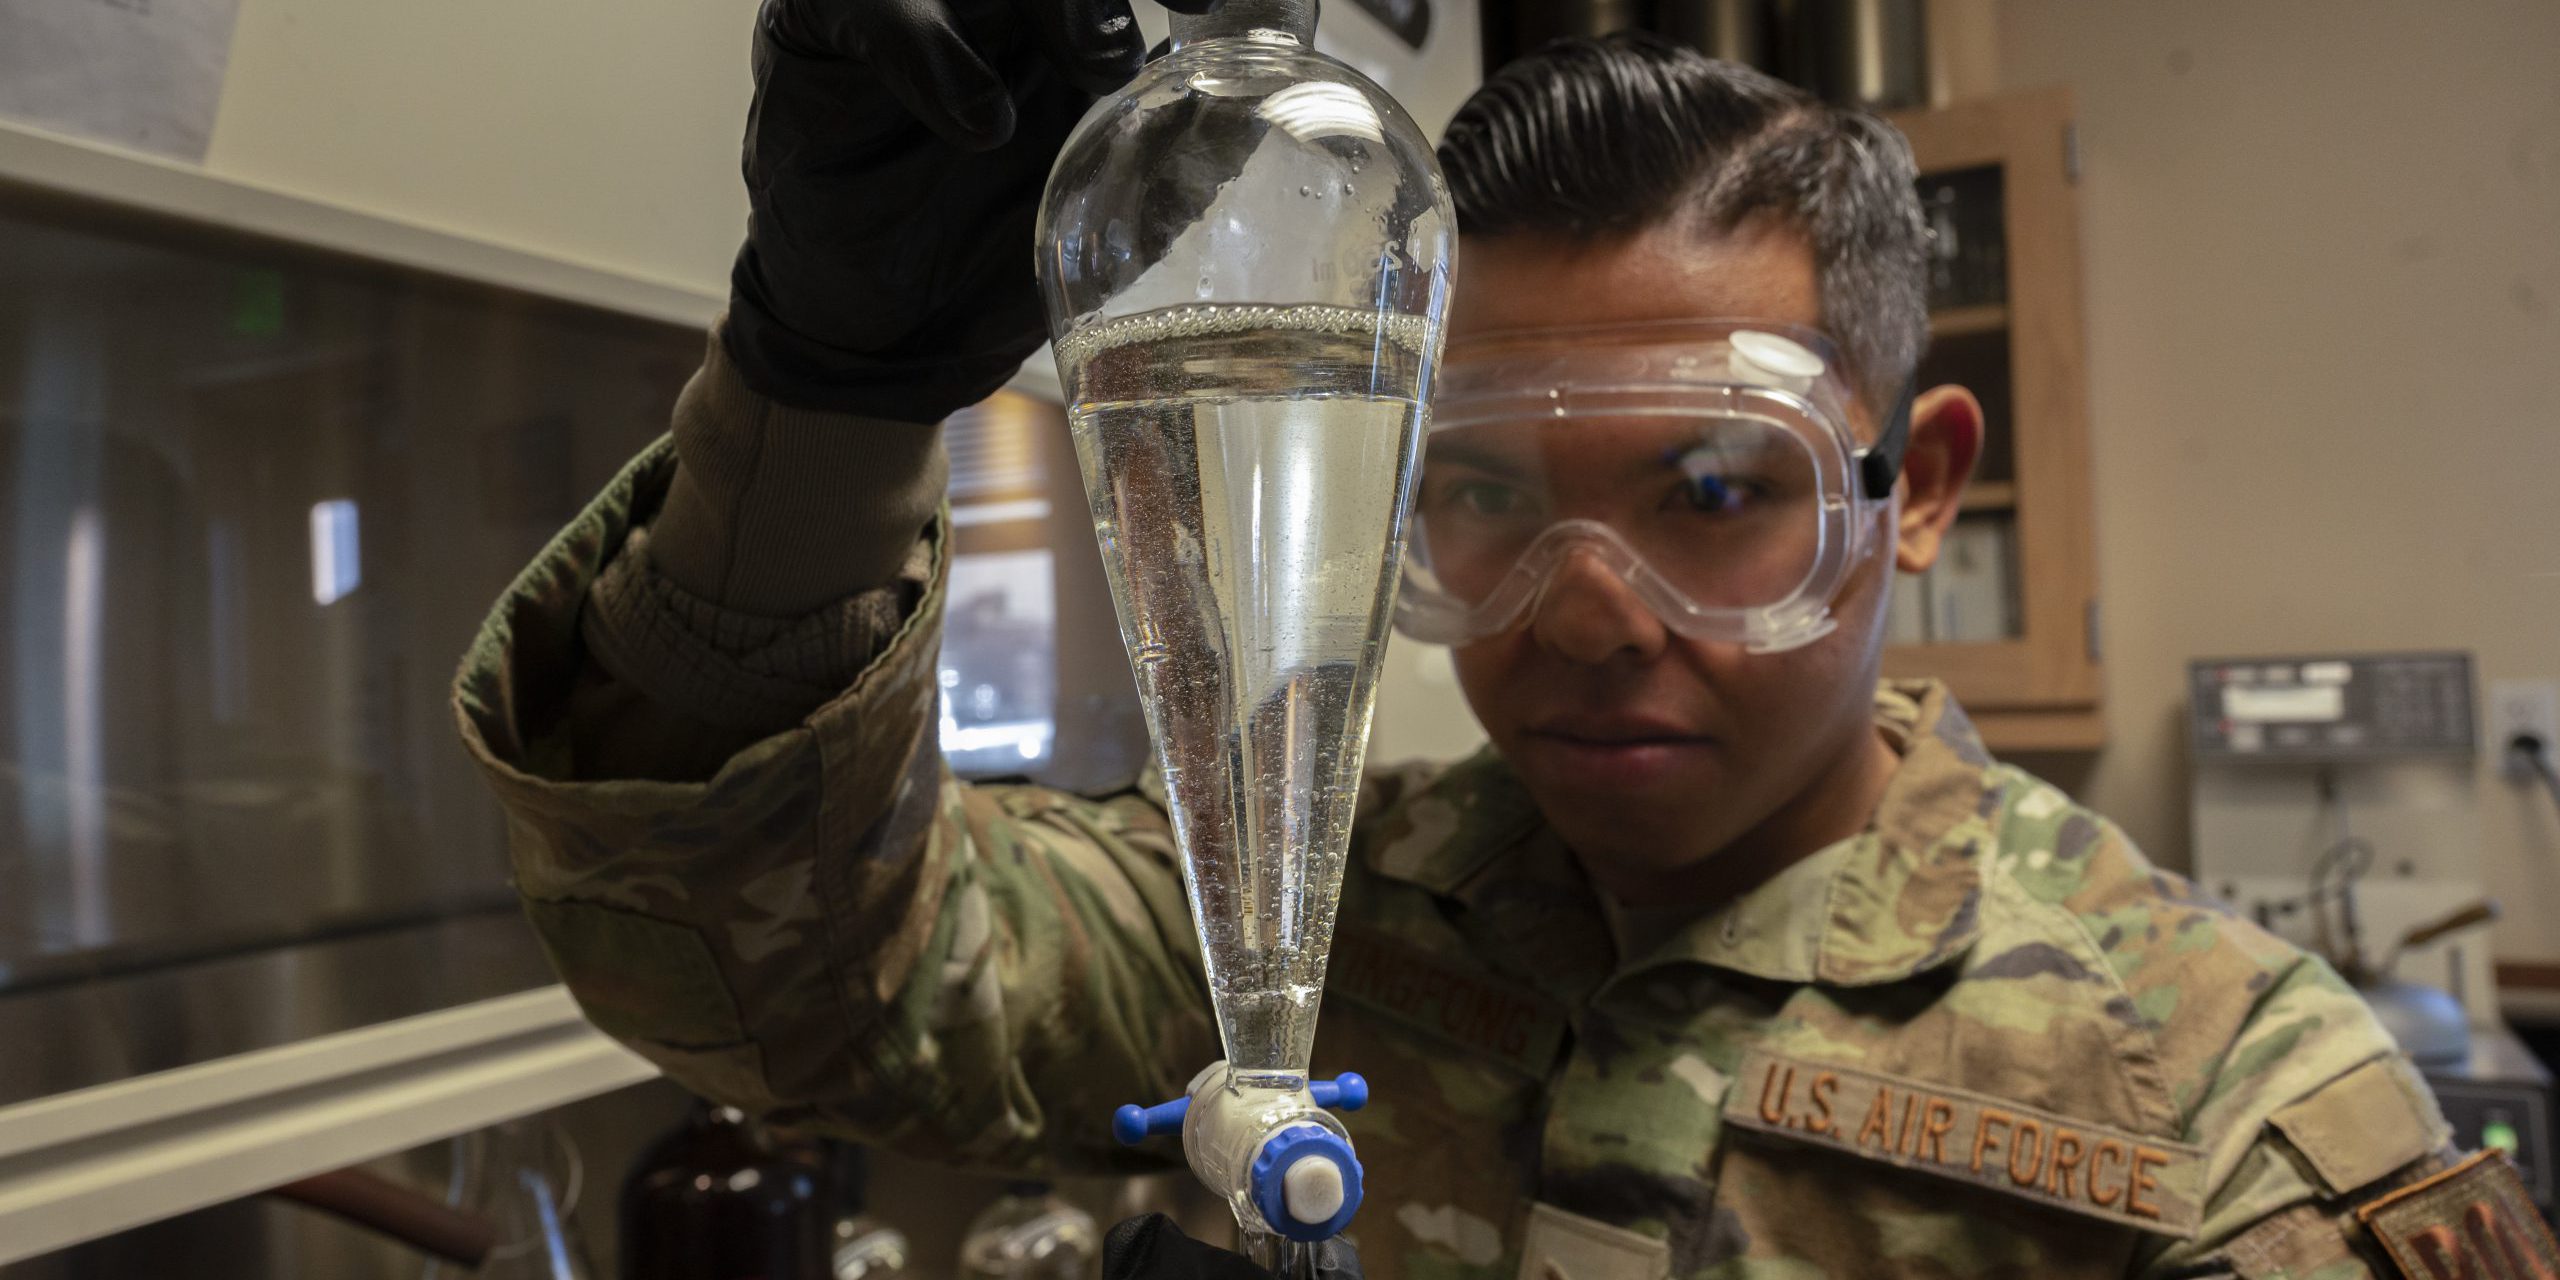 U.S. Air Force Staff Sgt. Austin Taitingfong, 49th Logistic Readiness Squadron (LRS) Fuels Laboratory noncommissioned officer in charge, inspects a flask of jet fuel at Holloman Air Force Base, NM, on December 12, 2022. The 49th LRS fuels laboratory is the first line of defense for fuel quality control for all organizations on base (U.S. Air Force photo by Airman 1st Class Isaiah Pedrazzini).